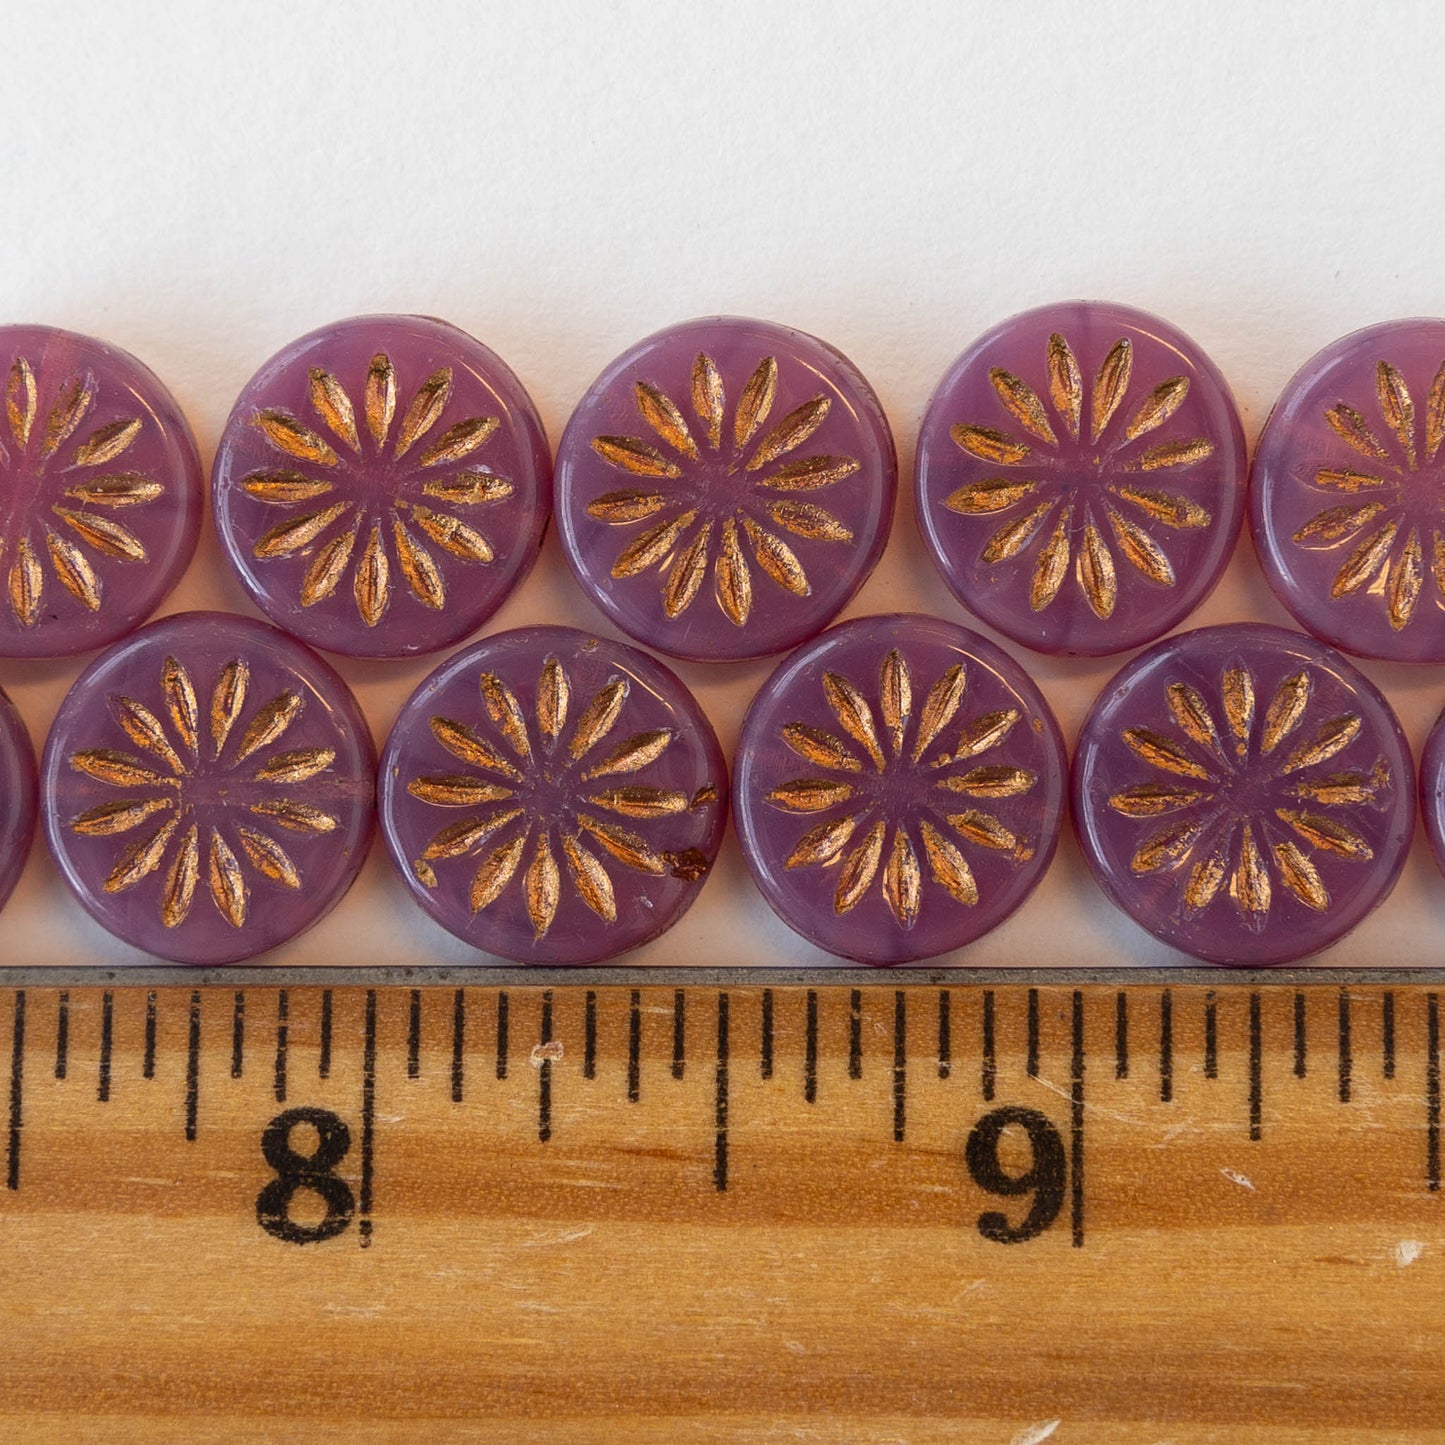 12mm Sun Coin Beads - Pink Opaline Glass with Gold Wash - 6 Beads